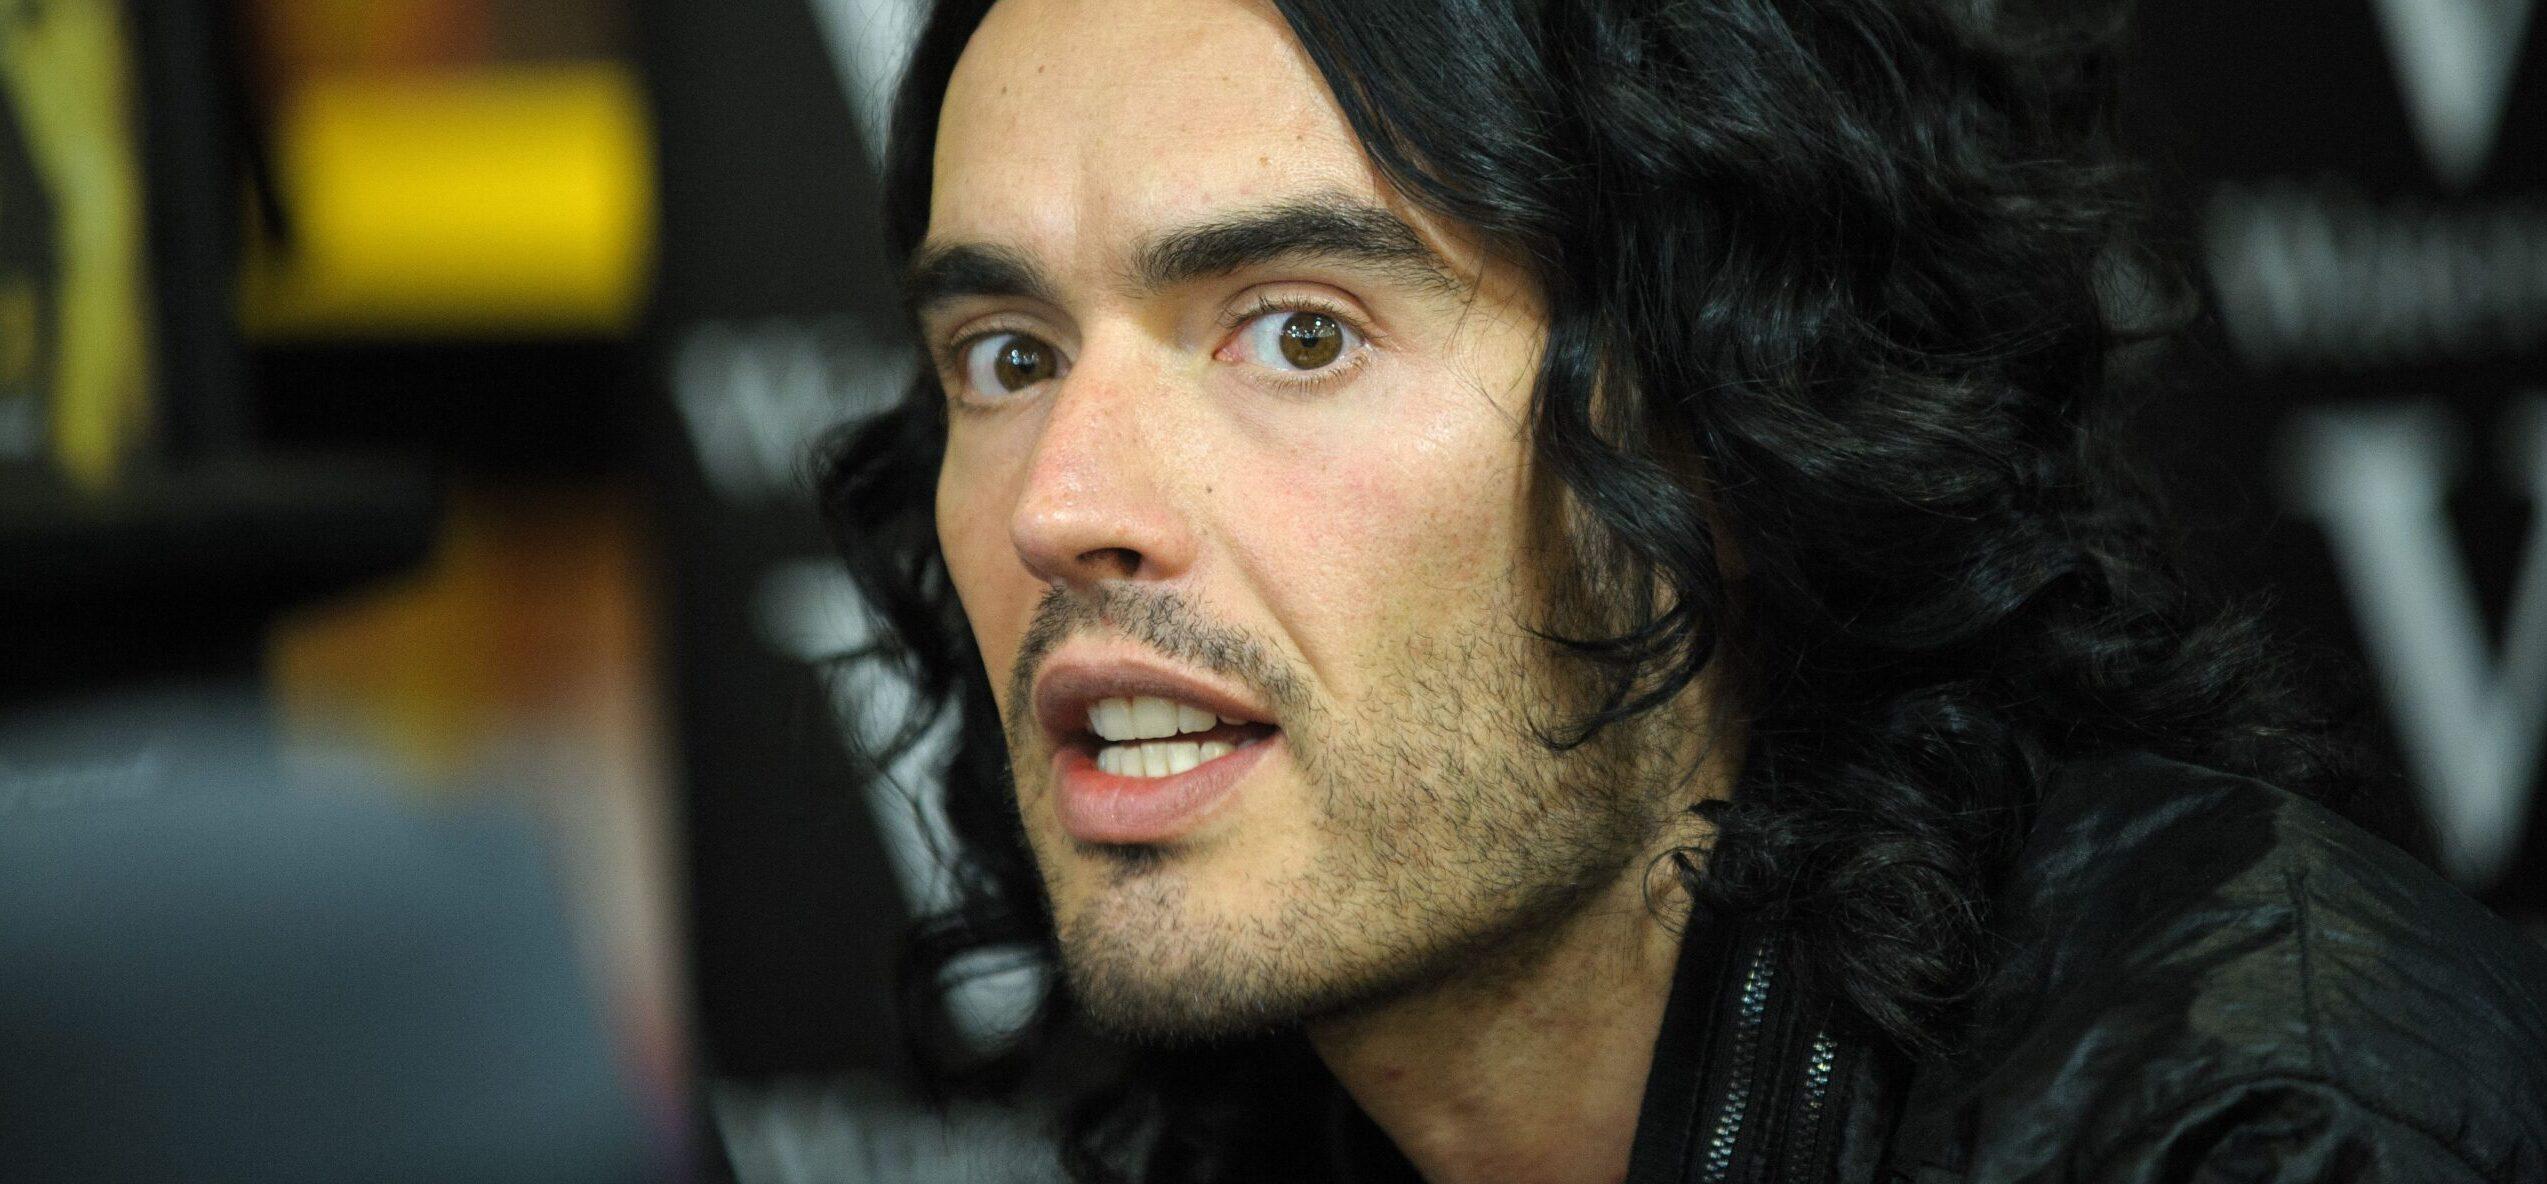 Underfire comedian Russell Brand , pictured here in 2010 in Edinburgh for a book signing for his second book "Booky Wooky 2". Allegations of rape and unwanted sexual behaviour have been levelled at Brand by the Sunday Times newspaper and Channel 4 Dispatc